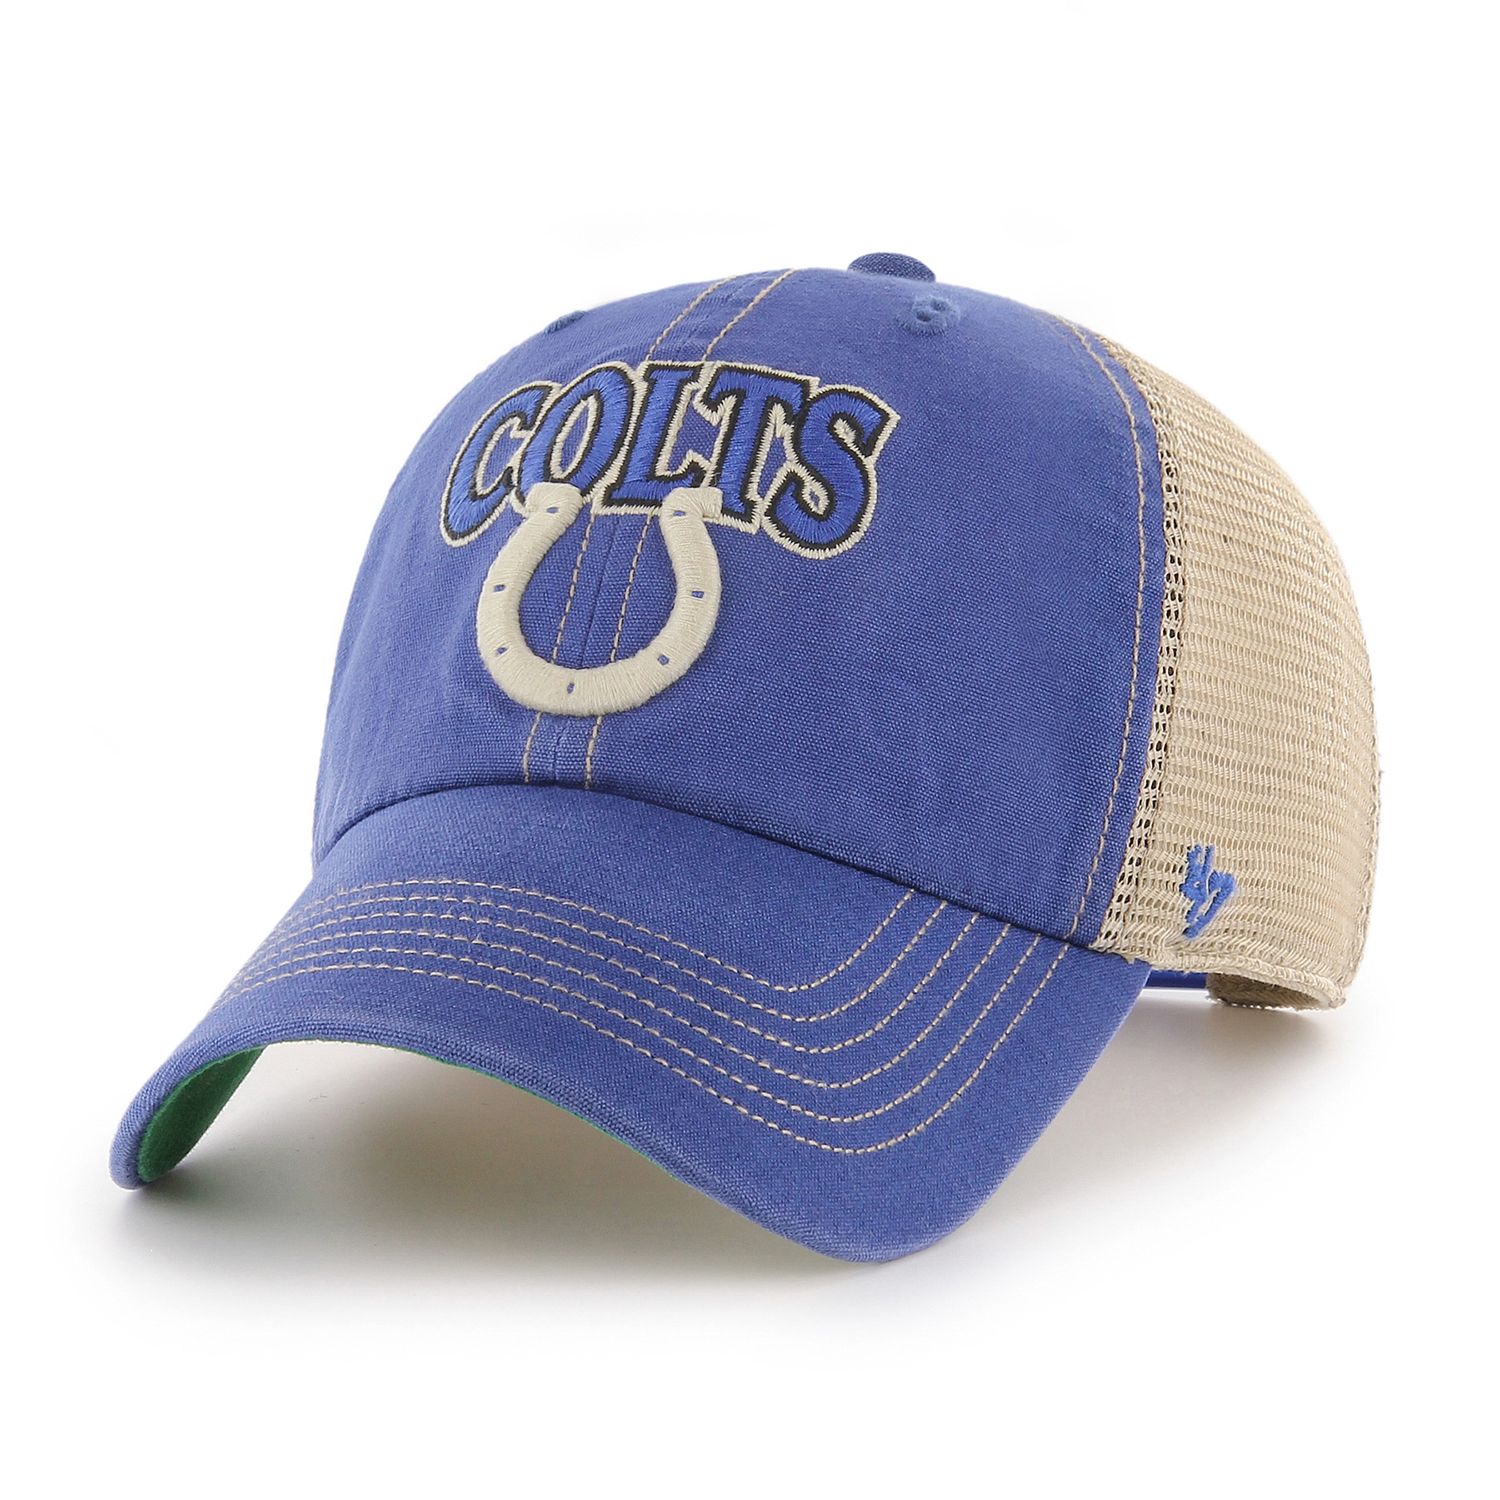 indianapolis colts hat